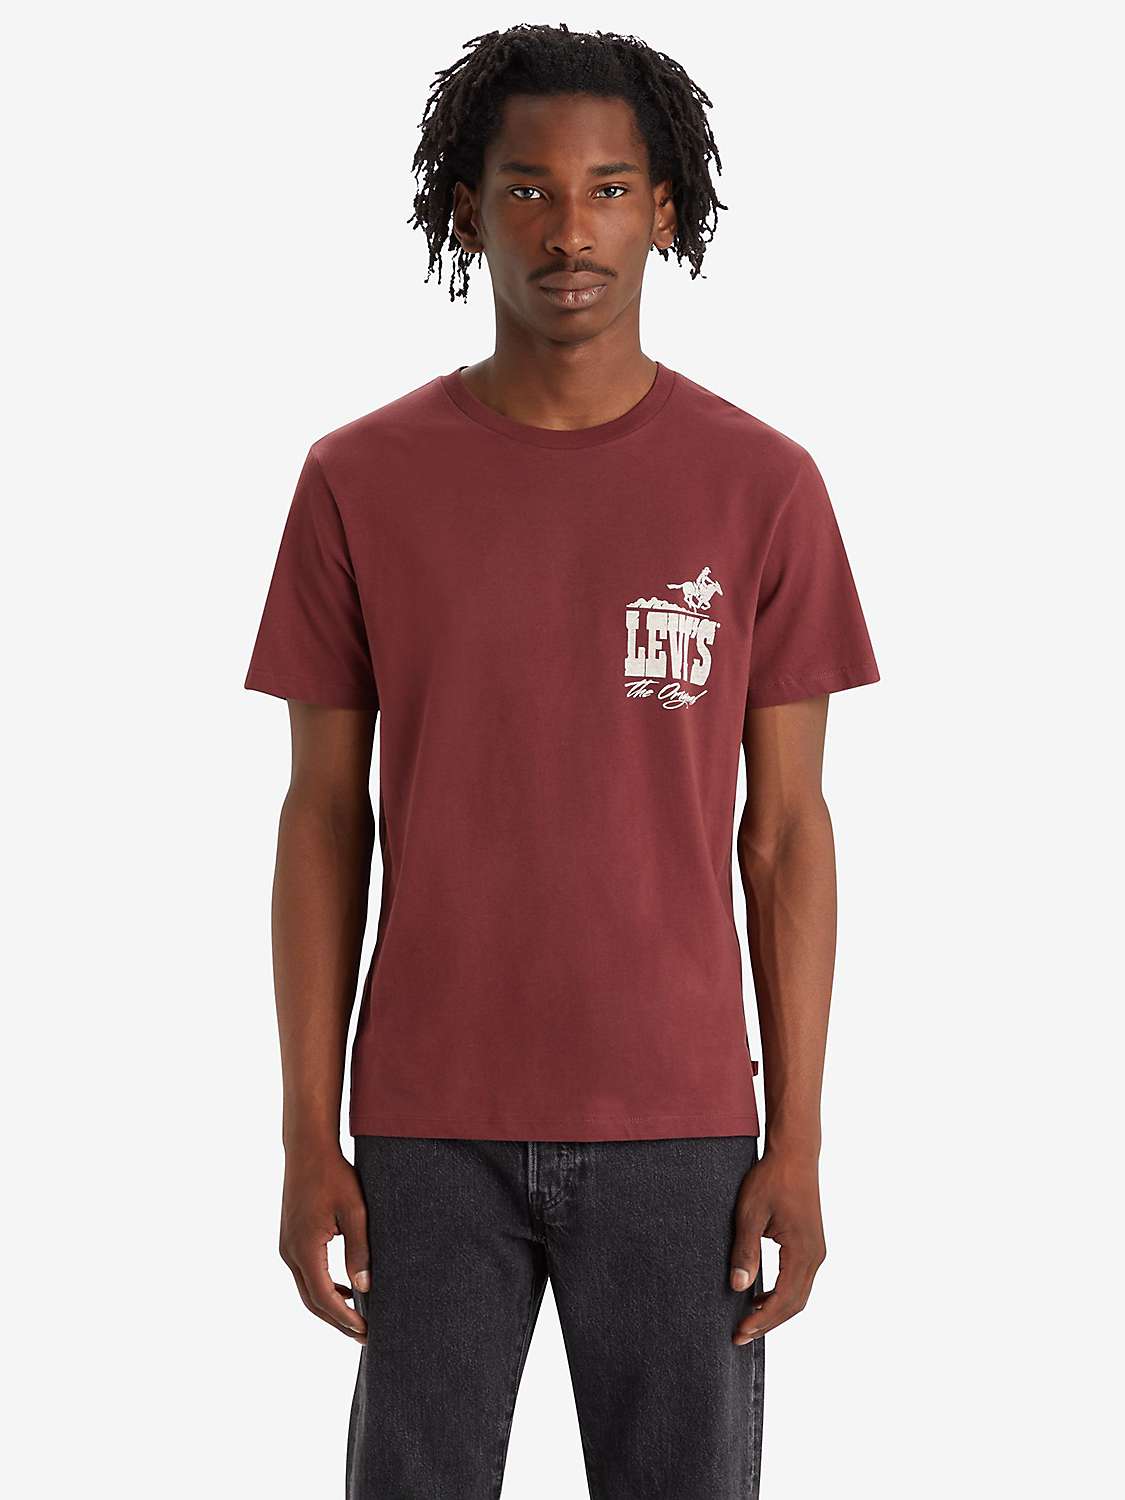 Buy Levi's Graphic Crew Neck T-Shirt, Red Online at johnlewis.com